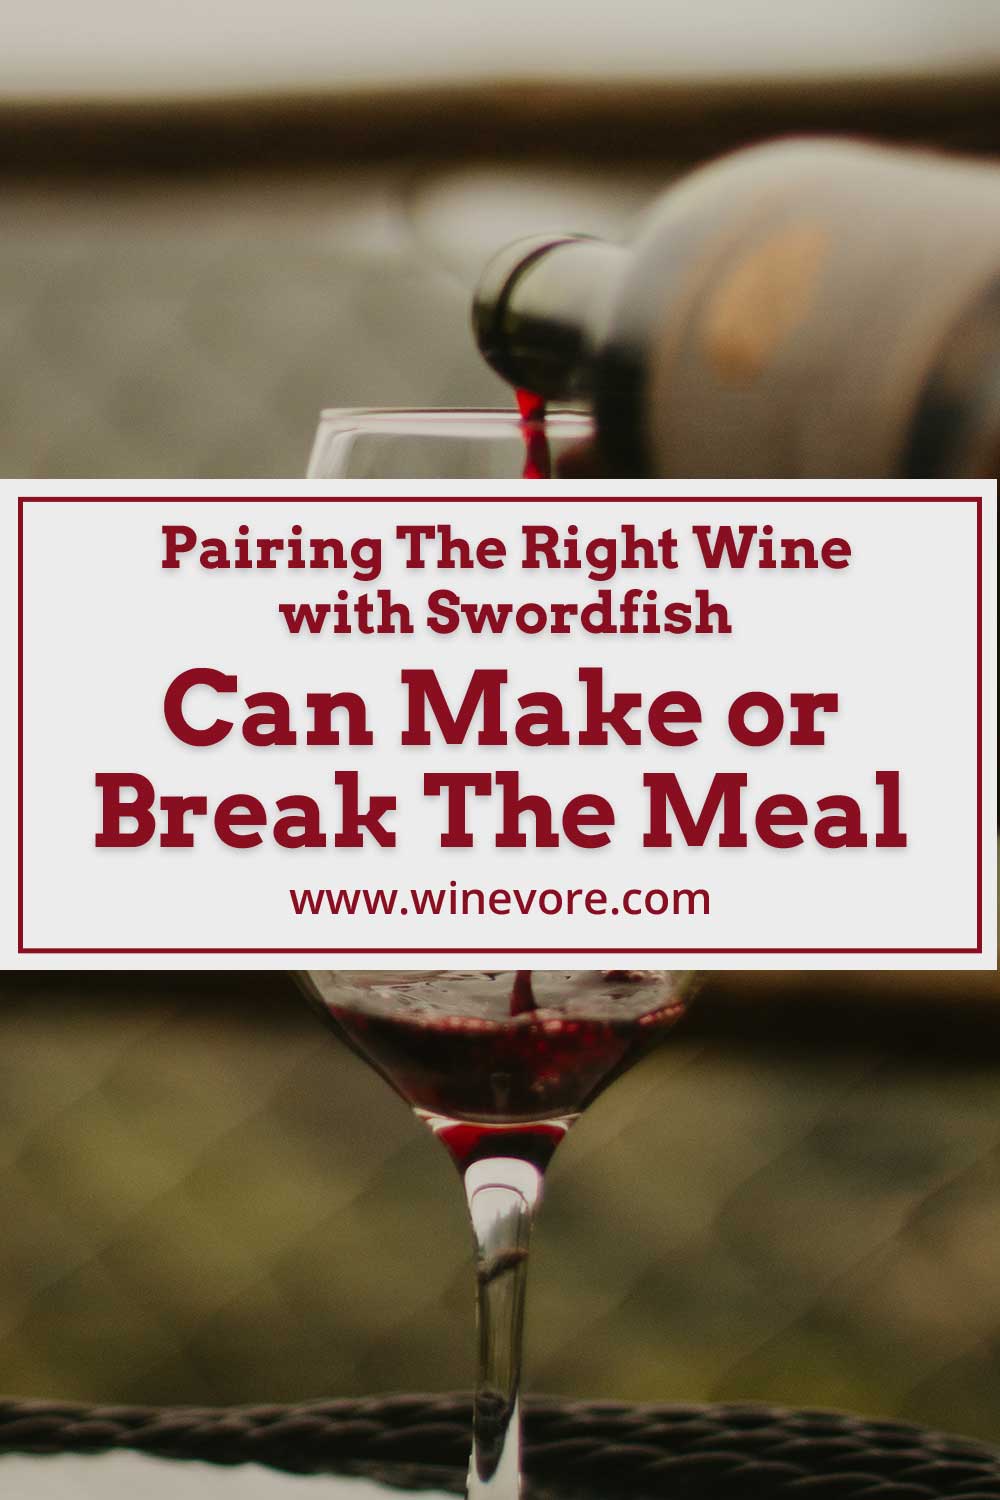 Red wine being poured from a bottle - Pairing The Right Wine with Swordfish.